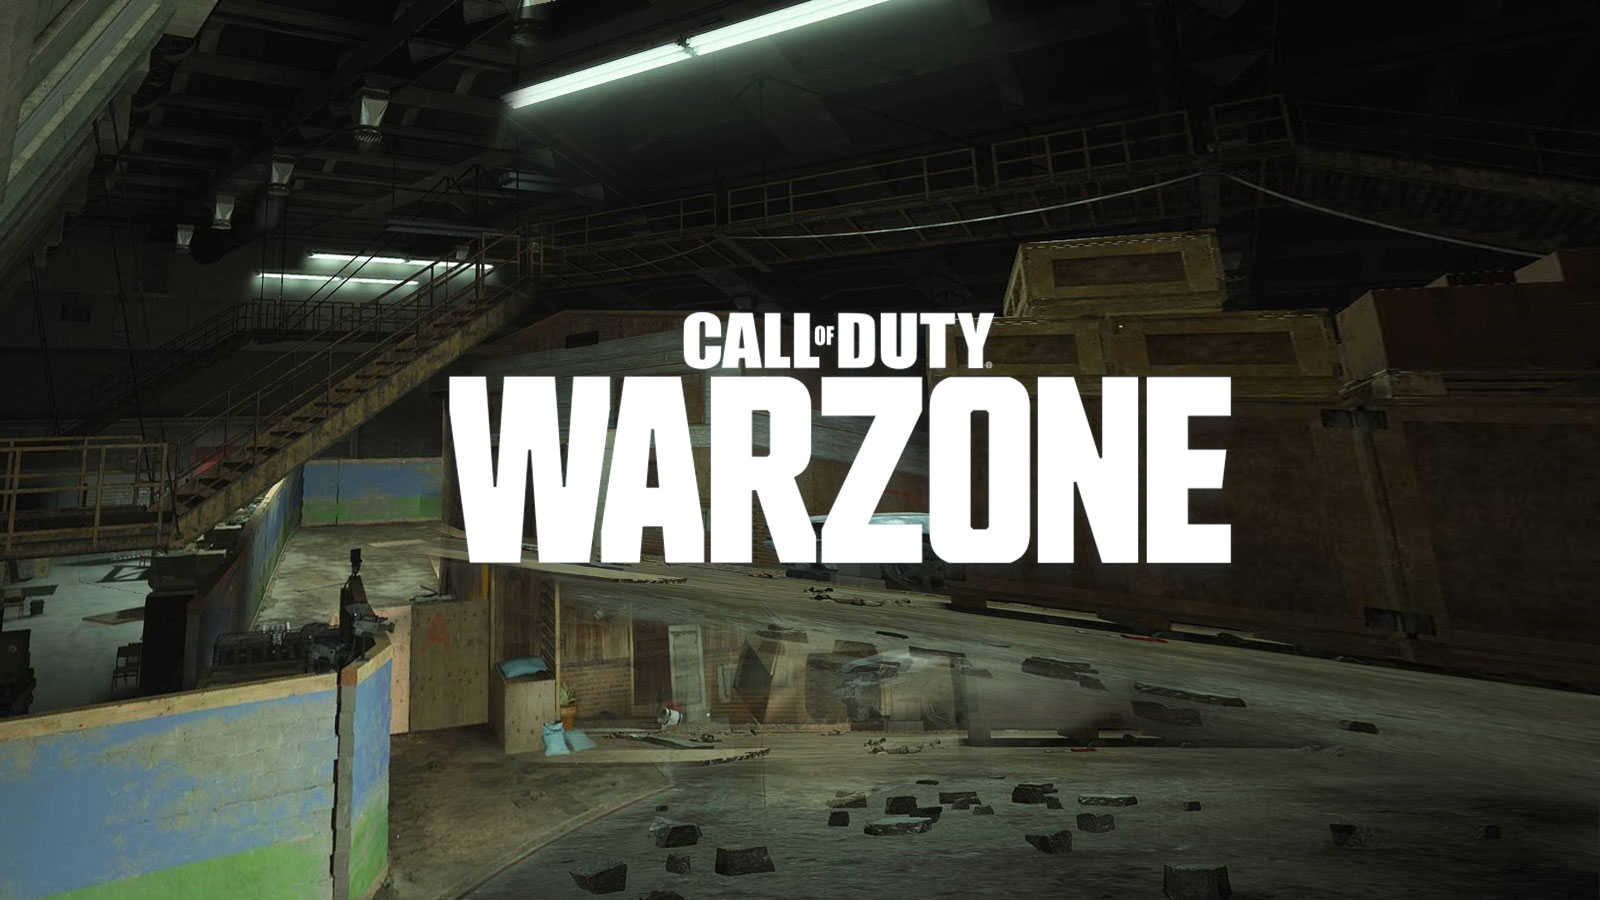 Warzone: How to Use the Camera to Your Advantage

